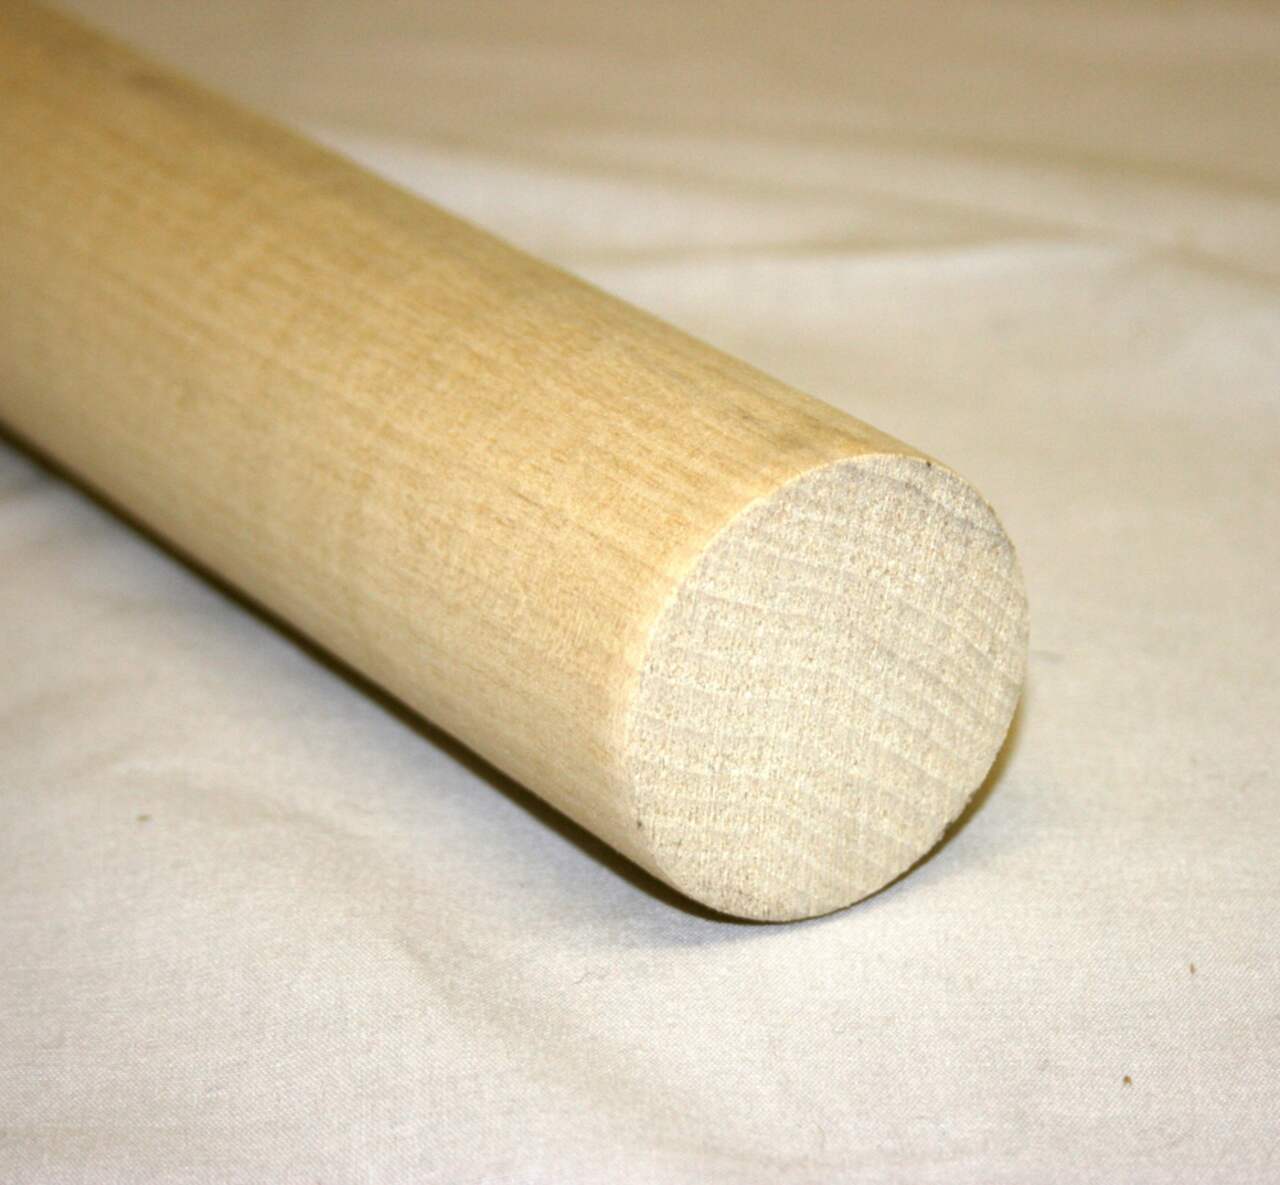 Wooden Dowel Rods Wood Sticks, 12x0.59 Round Wooden Dowels Rod, Pack of 15